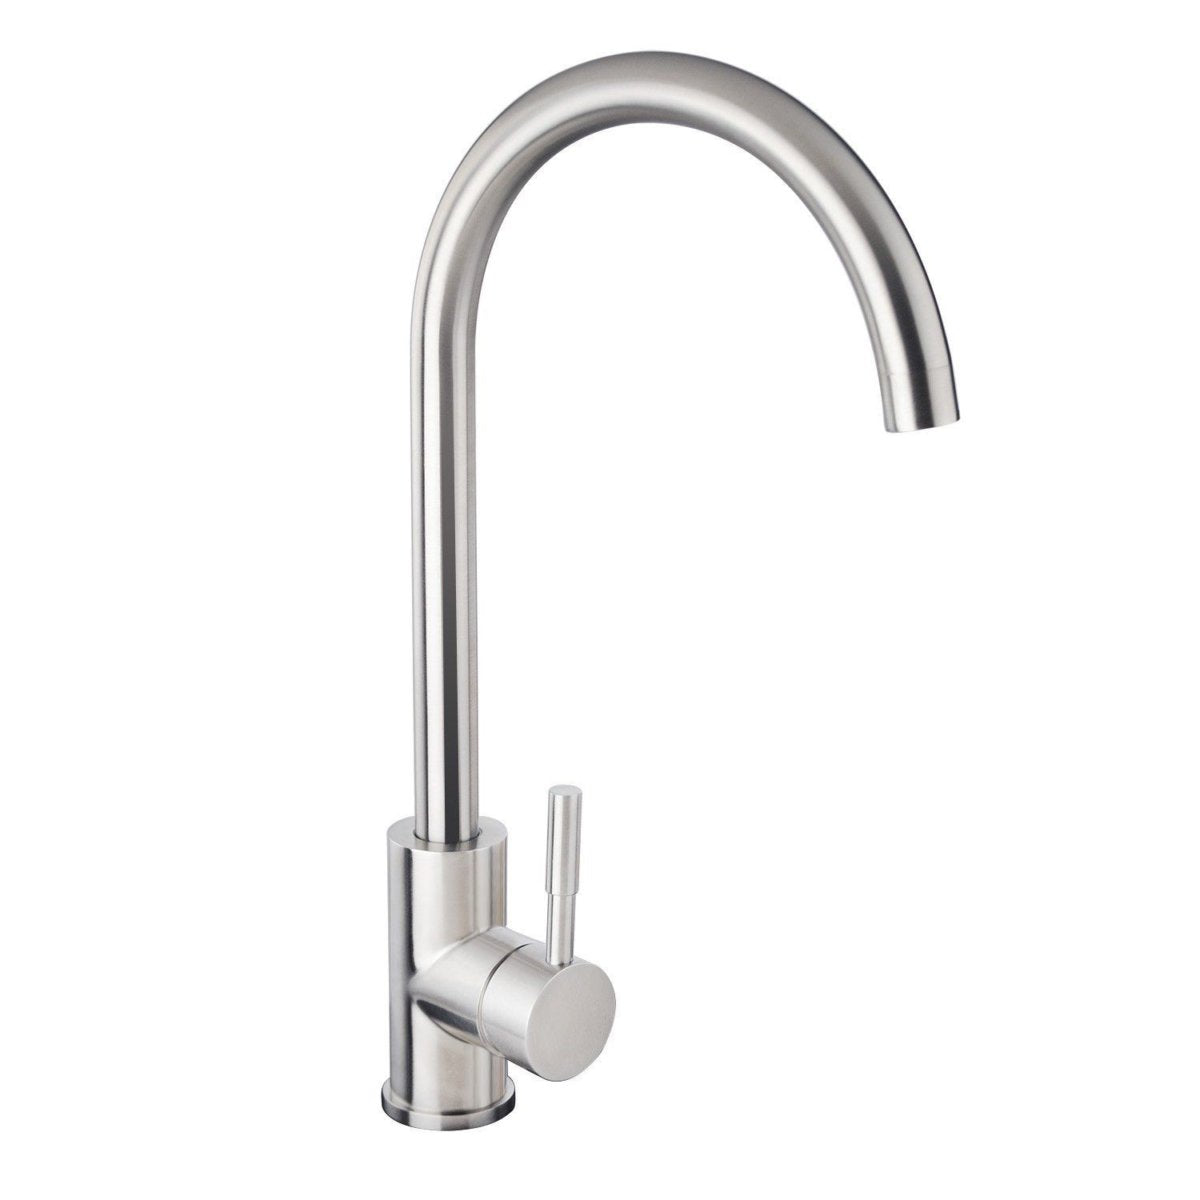 Linkware Elle Project 304 Stainless Steel Sink Mixer